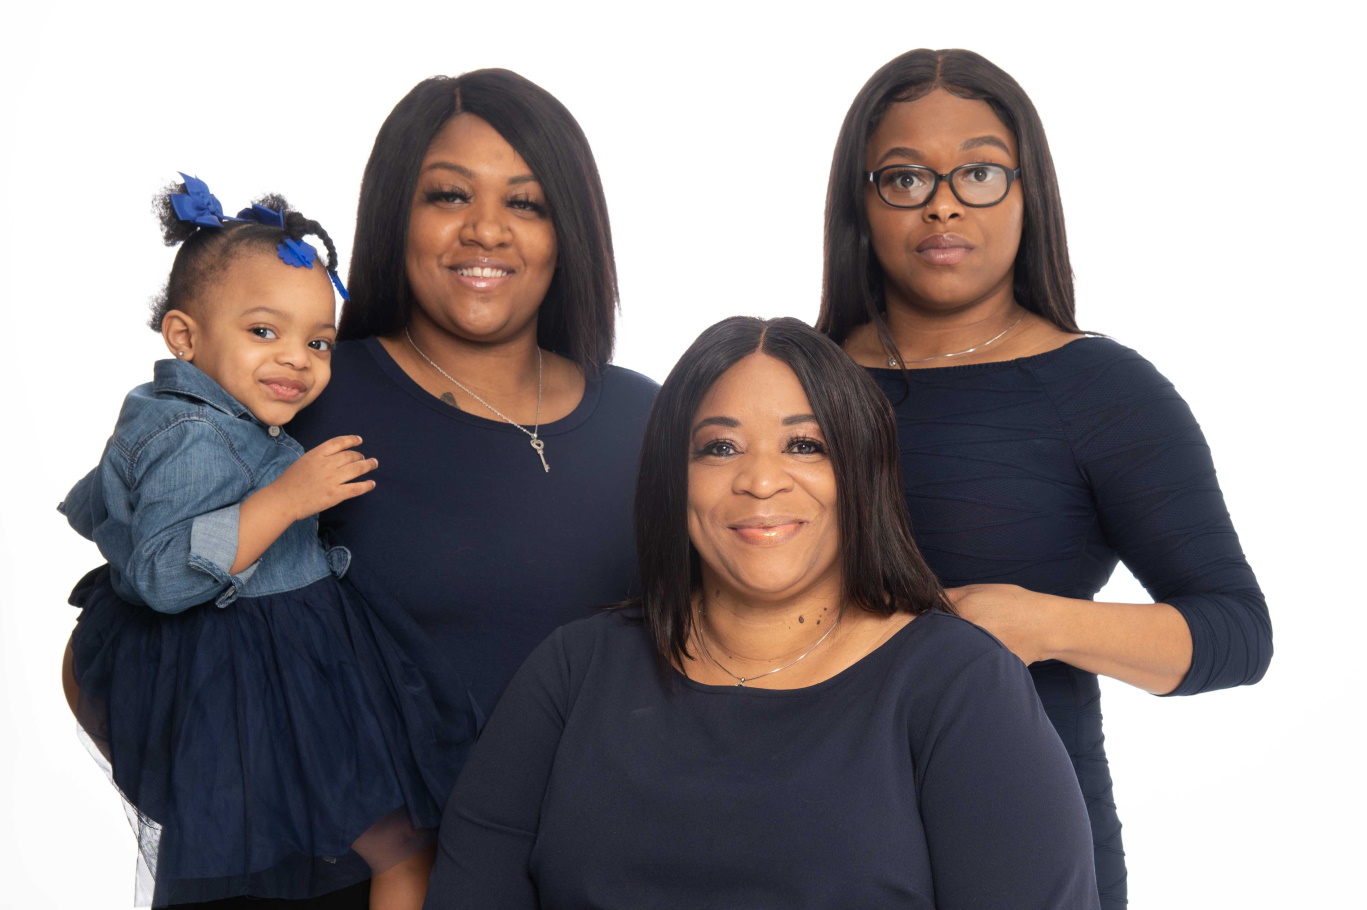 The Lewis family. From left to right: Naomi (granddaughter), Ja'Nia (daughter), Joanna, Ja'Nae (daughter and LU graduate).